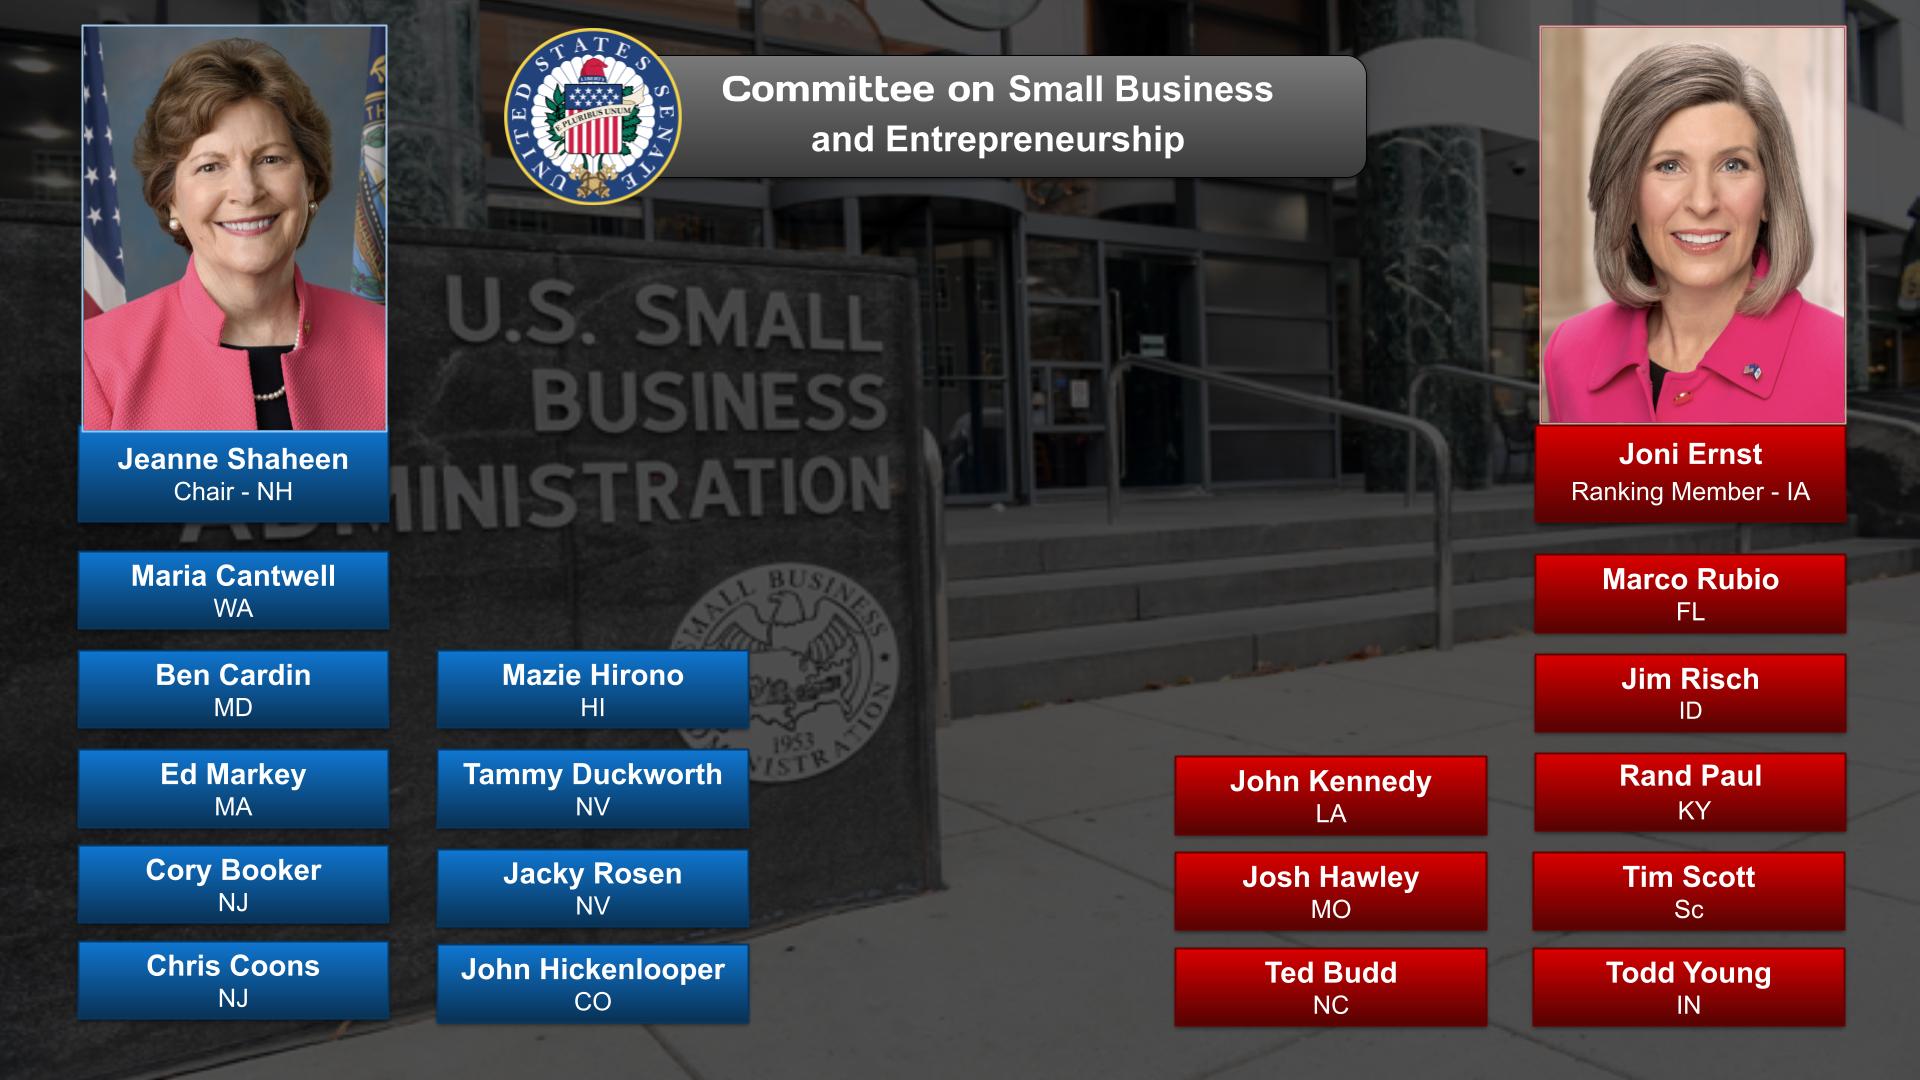 Committee on Small Business and Entrepreneurship